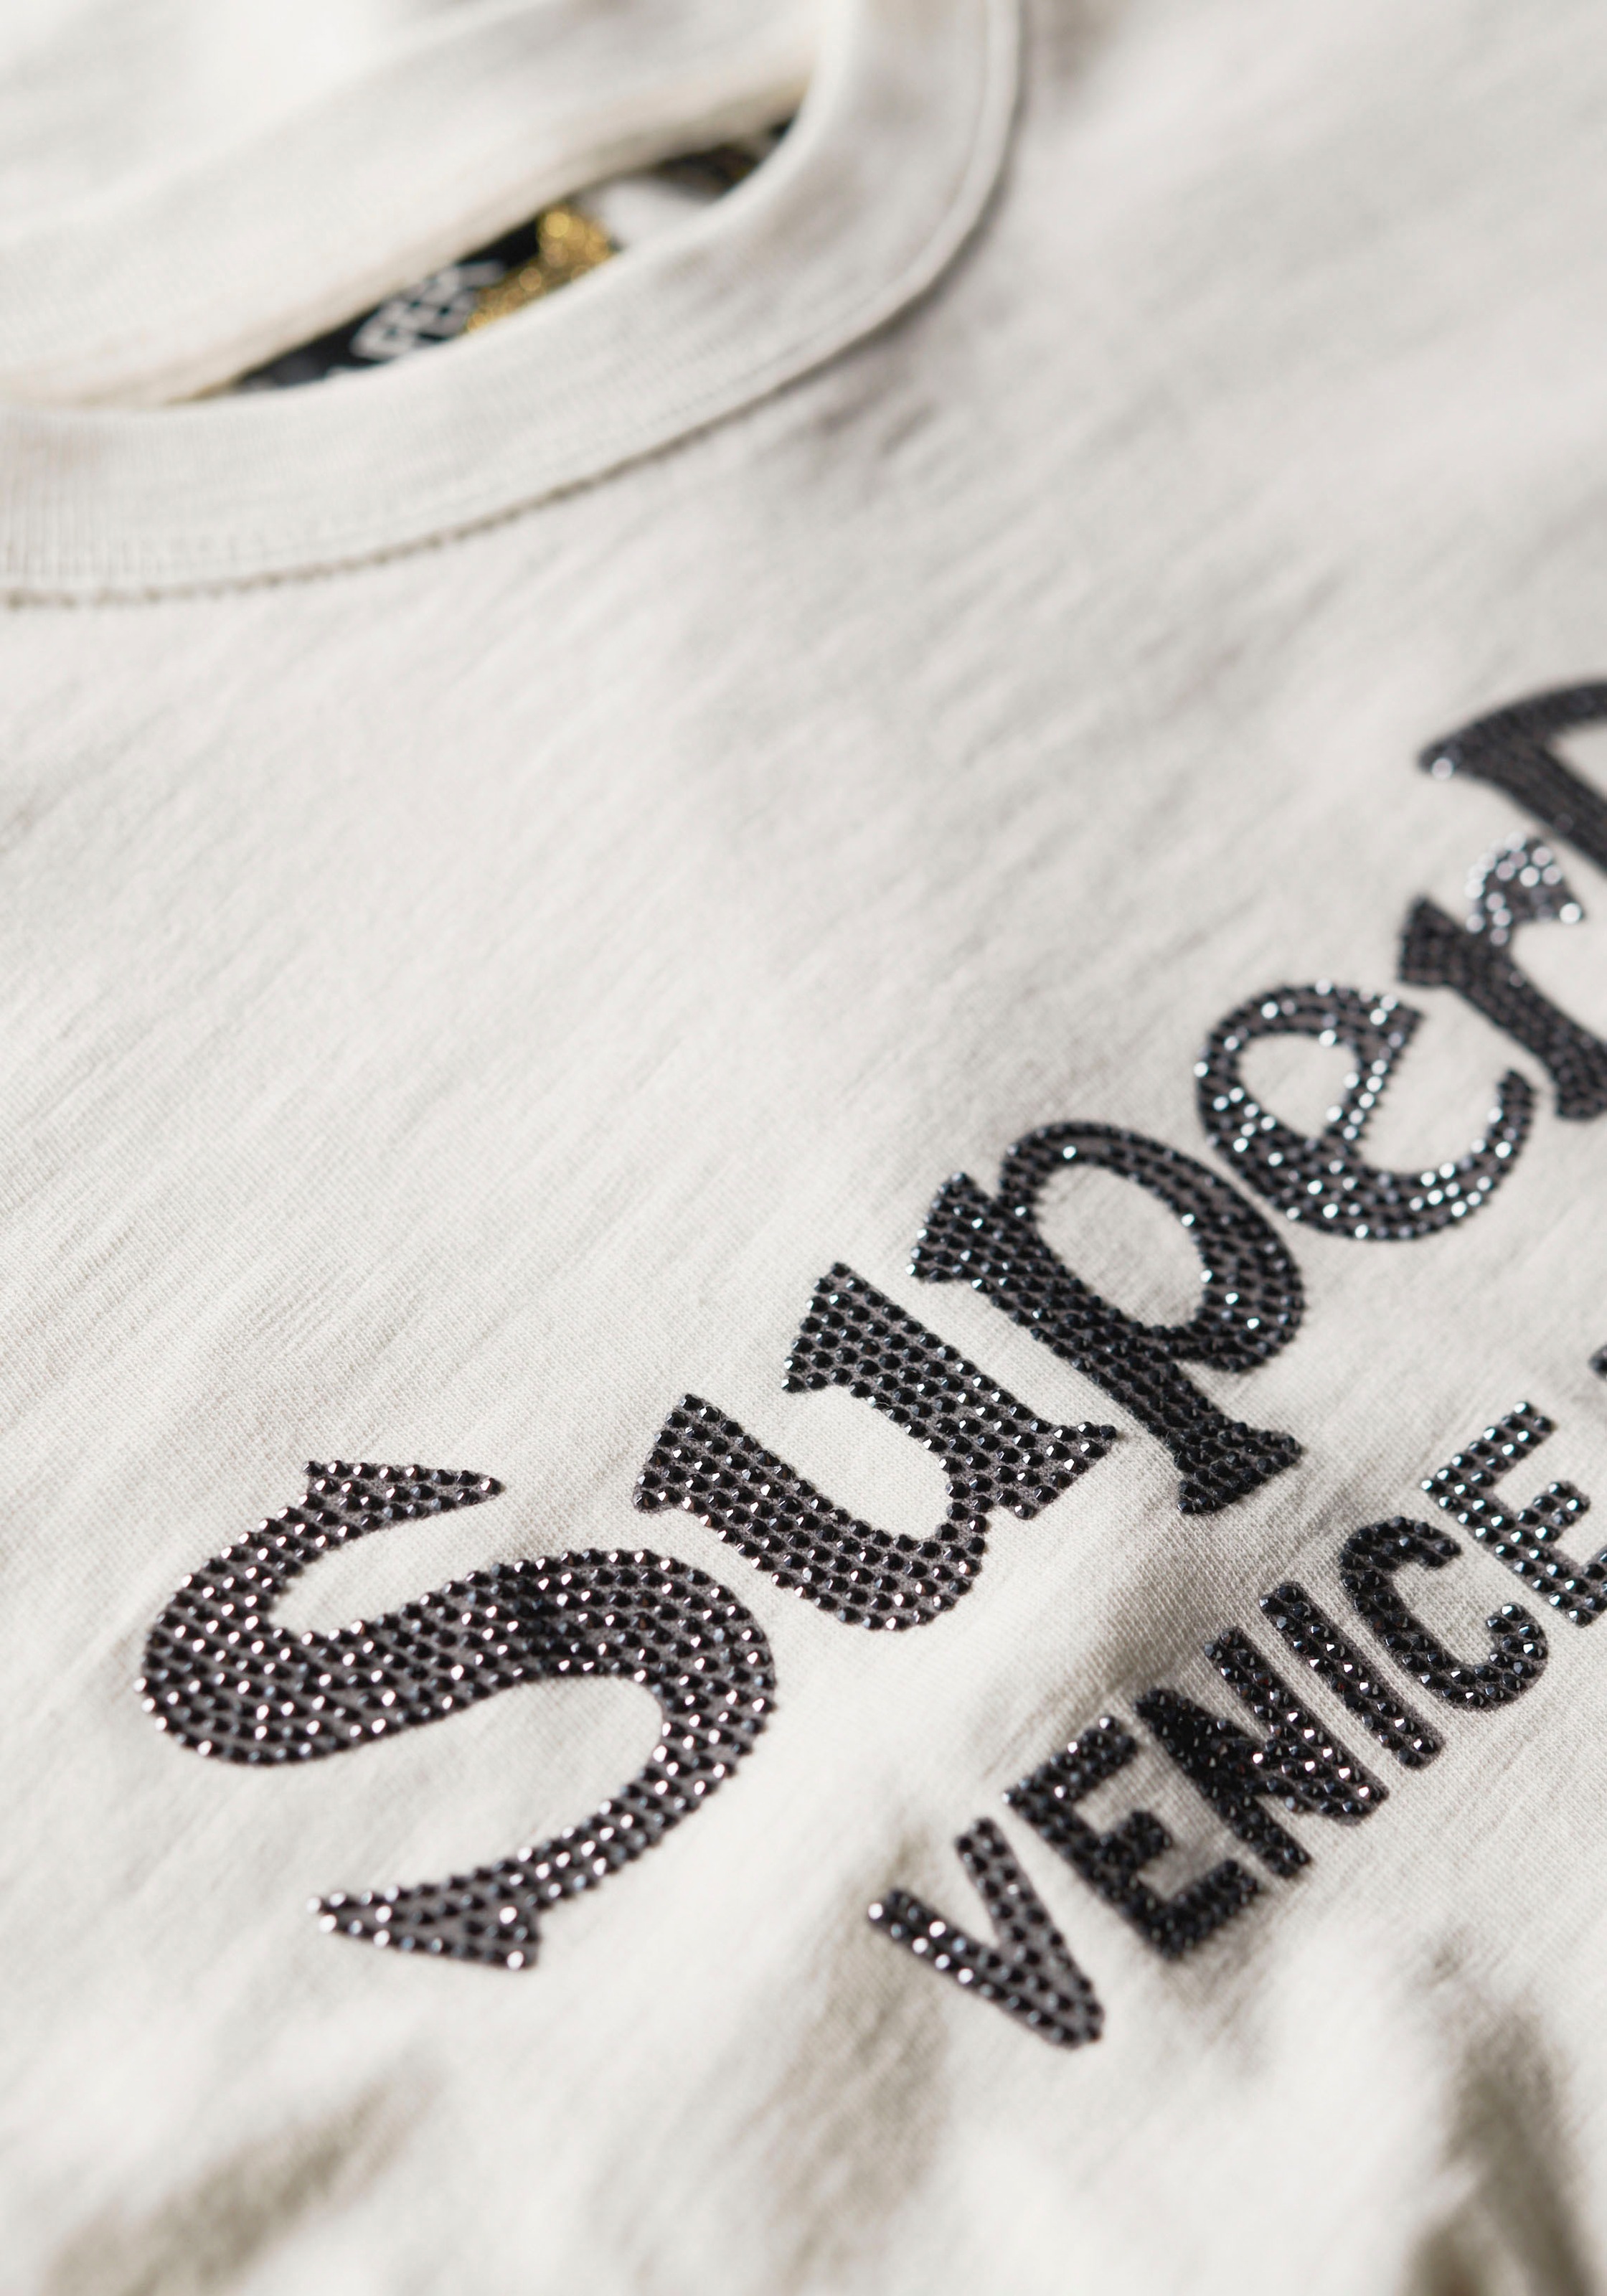 Superdry T-Shirt »METALLIC VENUE RELAXED TEE«